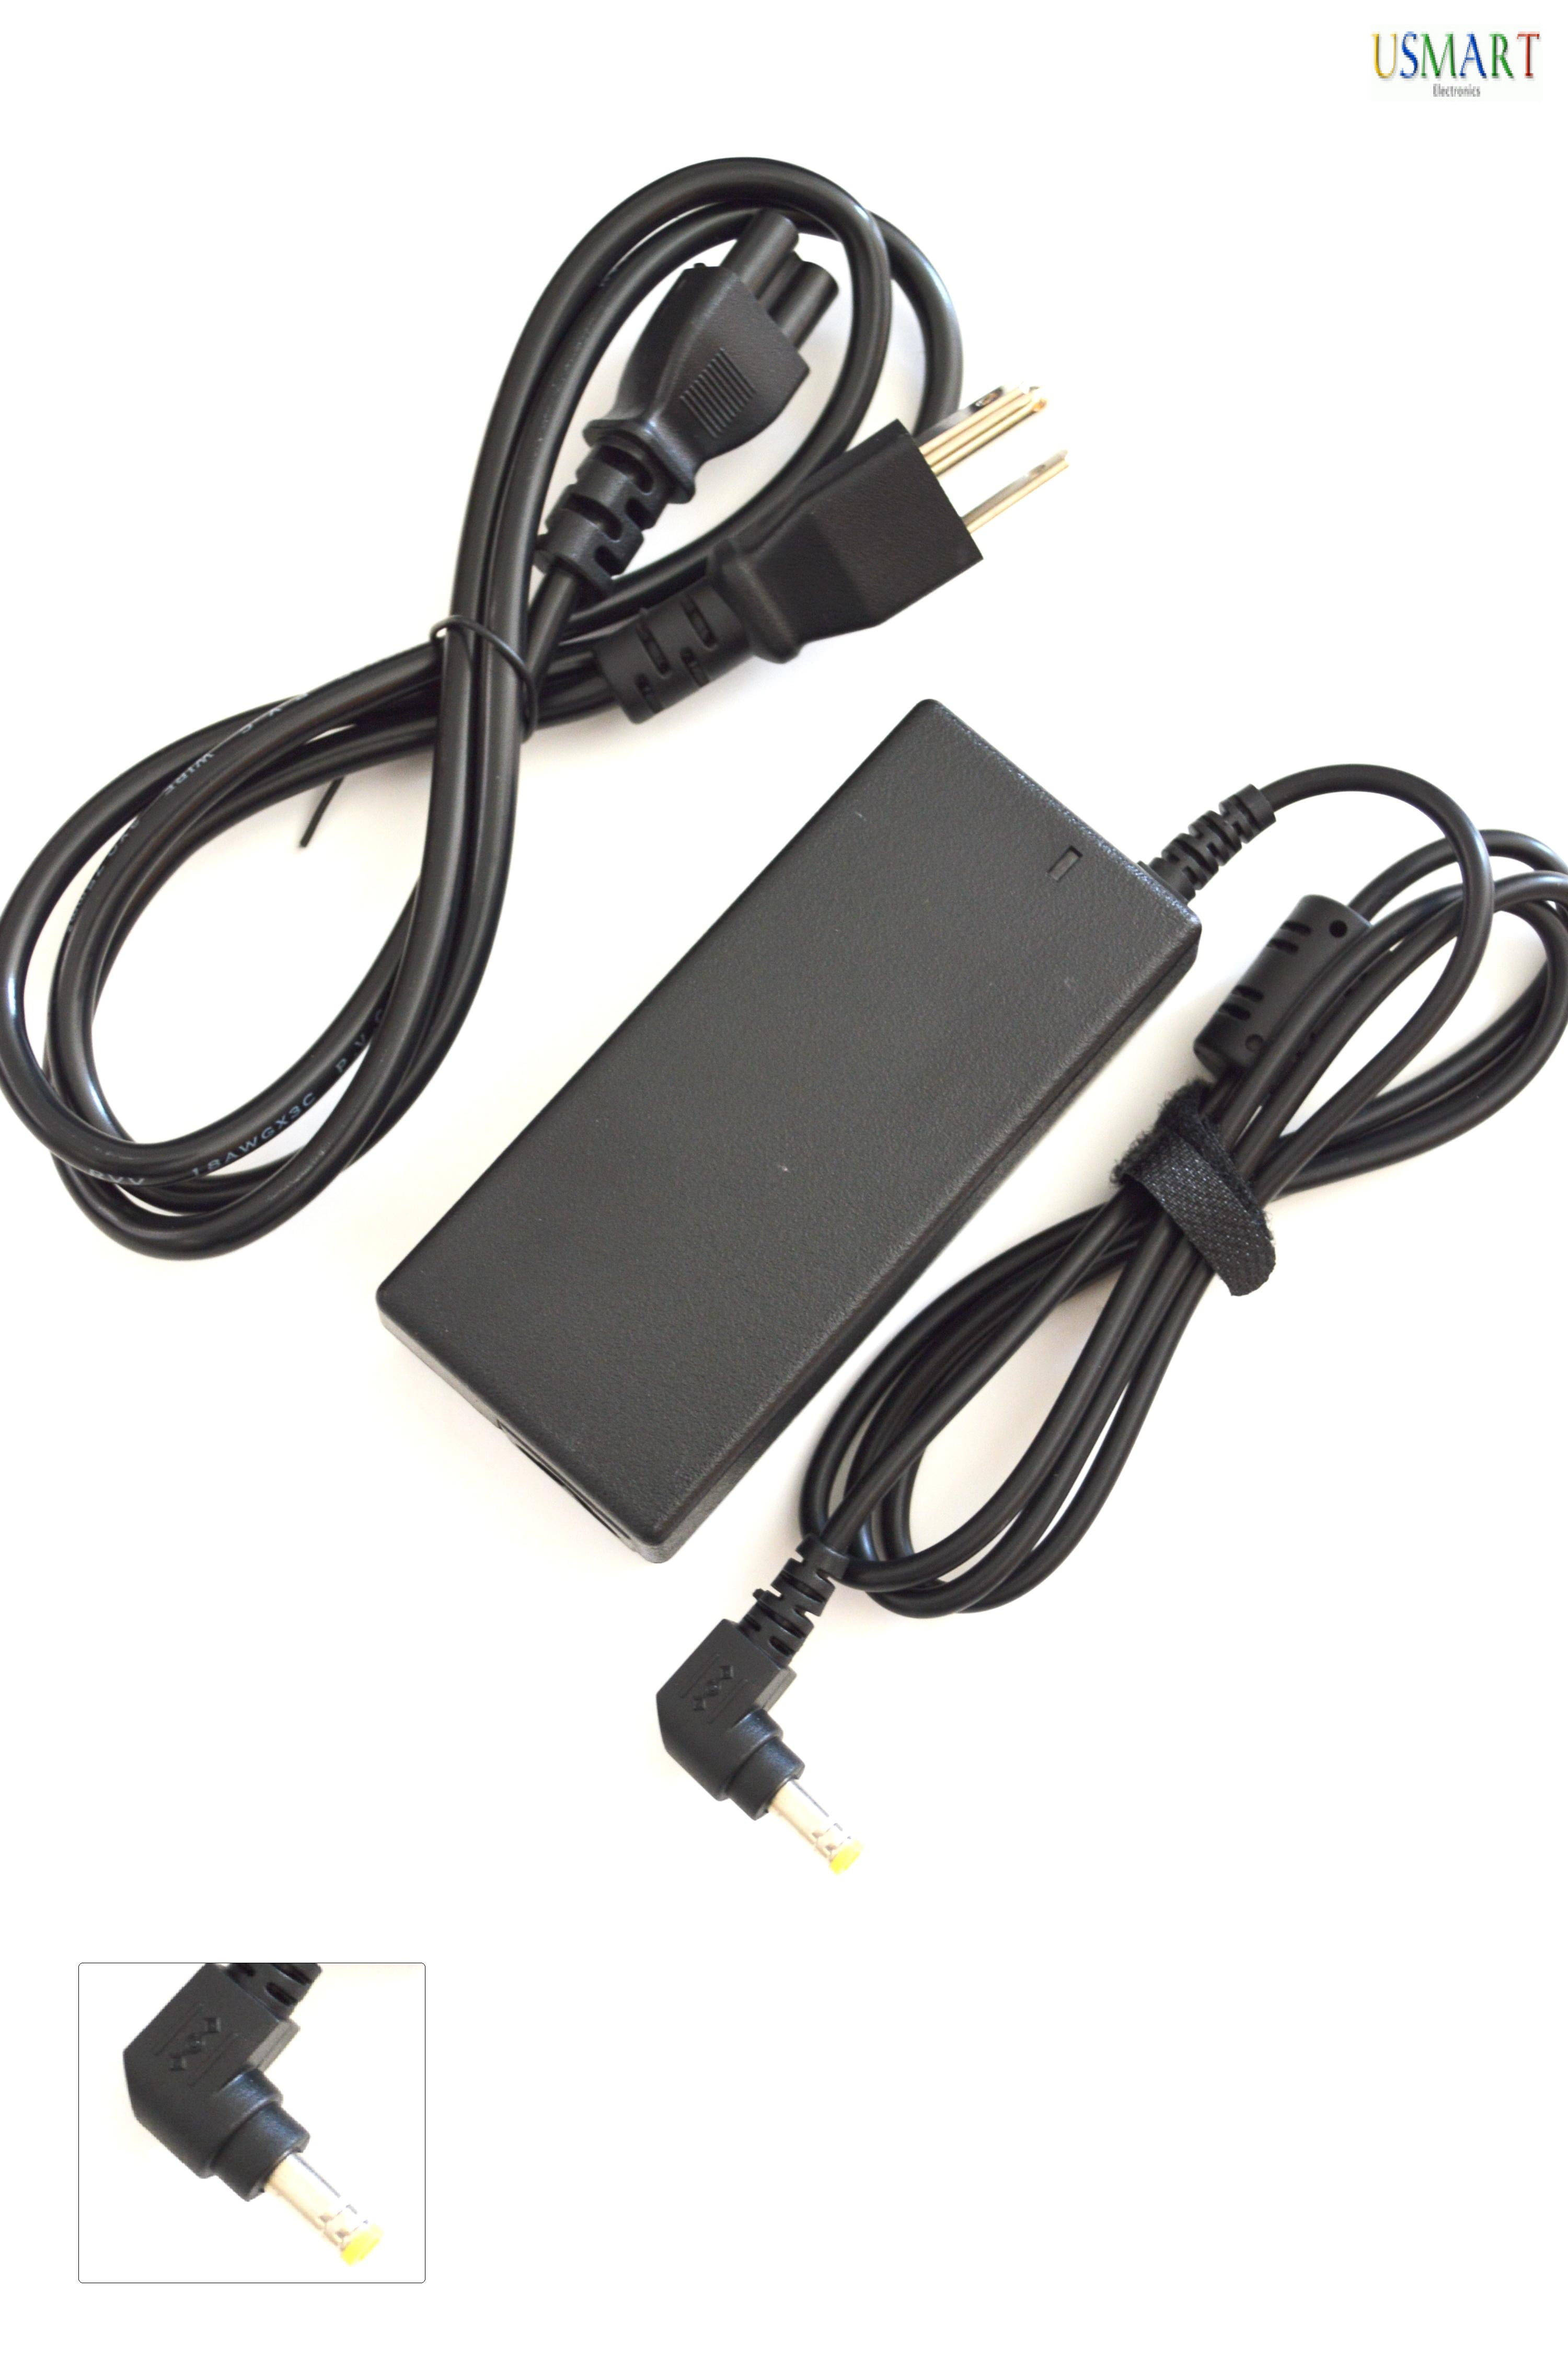 Ac Adapter Laptop Charger for Asus Vivobook X502,X502C, X502CA-BCL0901D, X501A-SPD0503W Asus Vivobook X502CA-BCL0901D, X550CA-DB91, X550CA-DB31 Laptop Power Supply Cord Plug